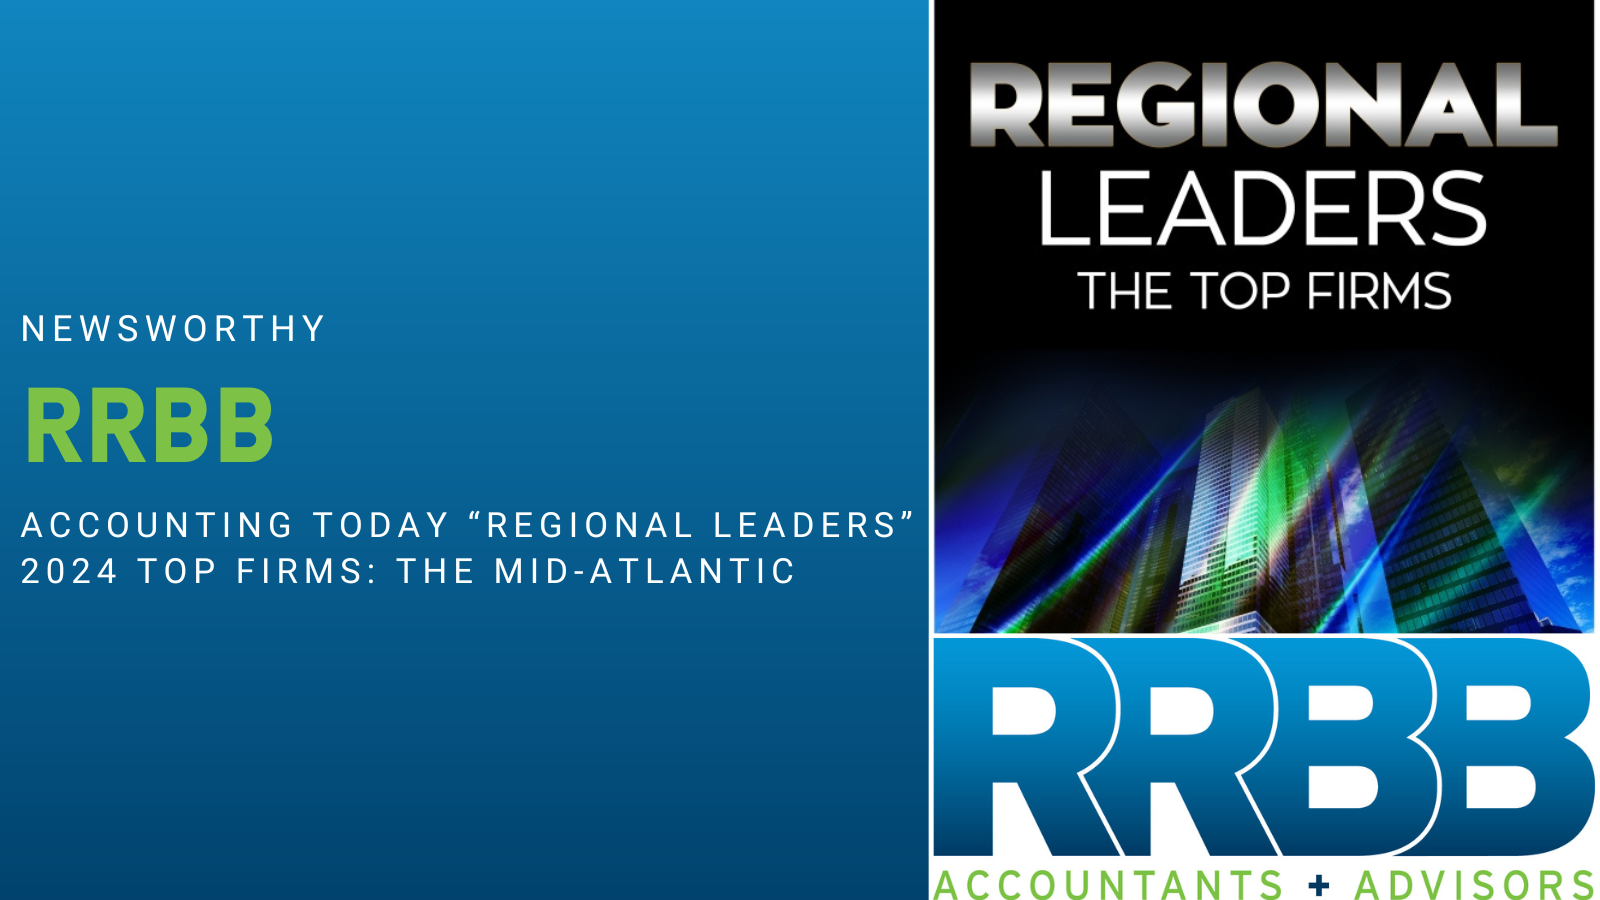 Accounting Today Again Names RRBB a 2024 Regional Leader in the Mid-Atlantic Image